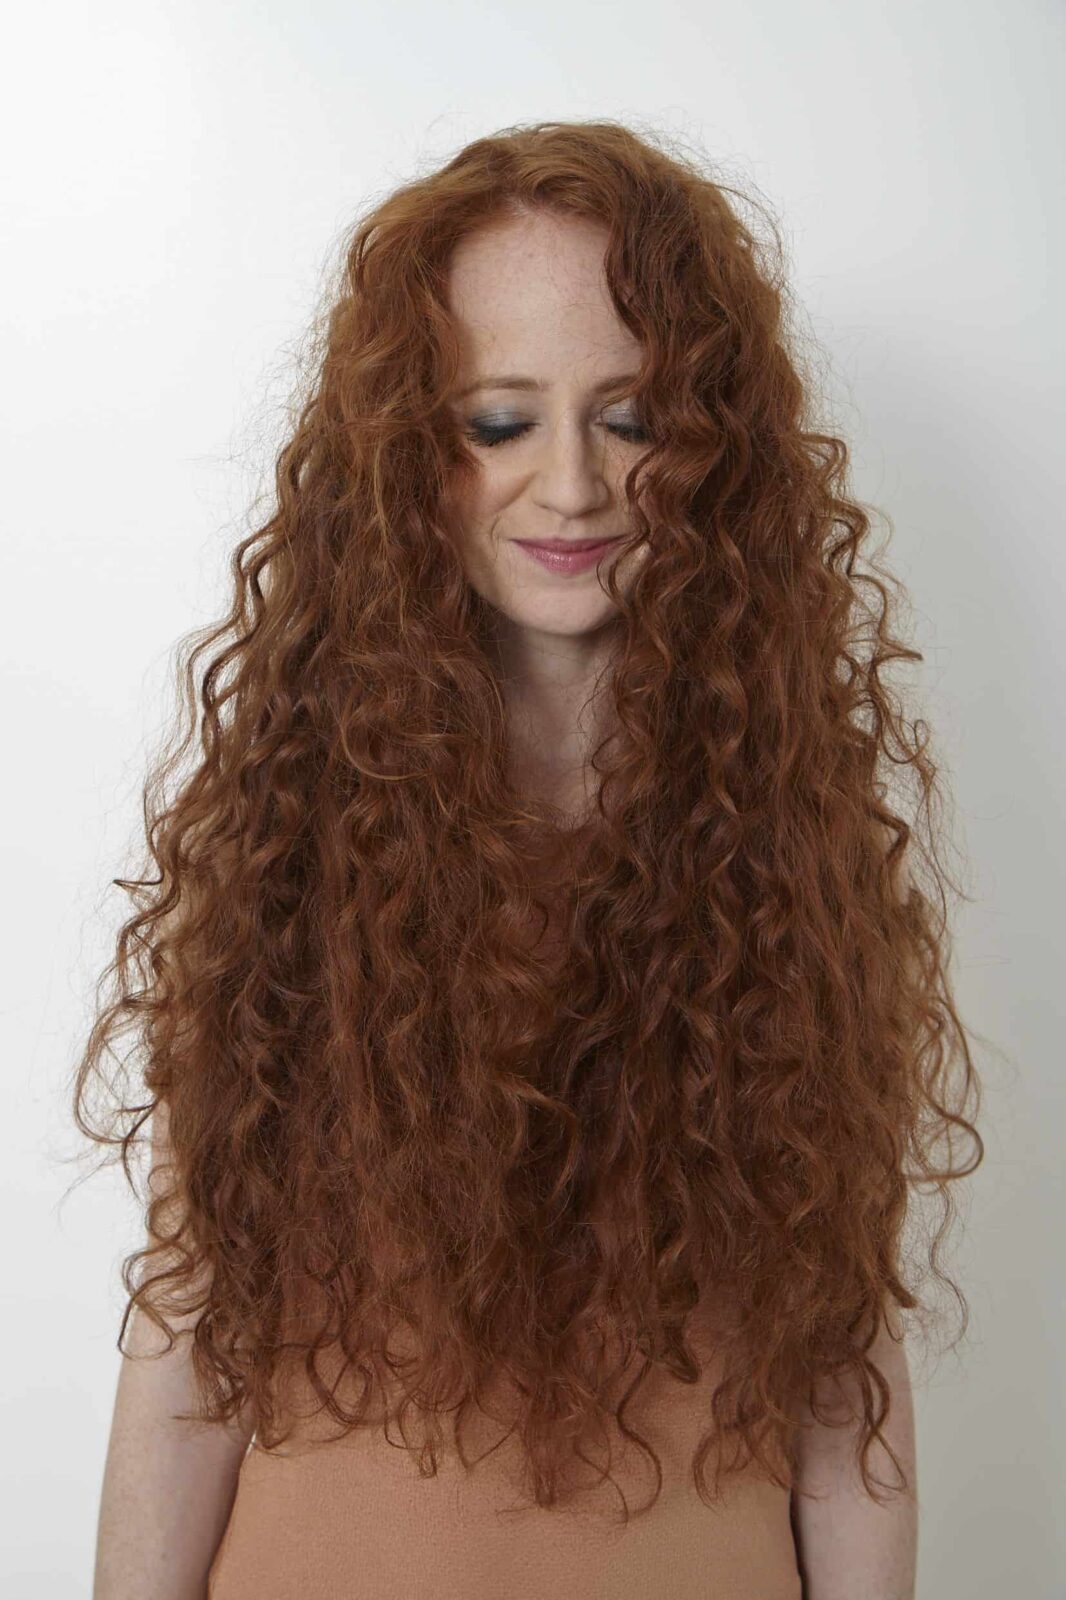 4 Easy Ways to Care for Your Curly Red Hair